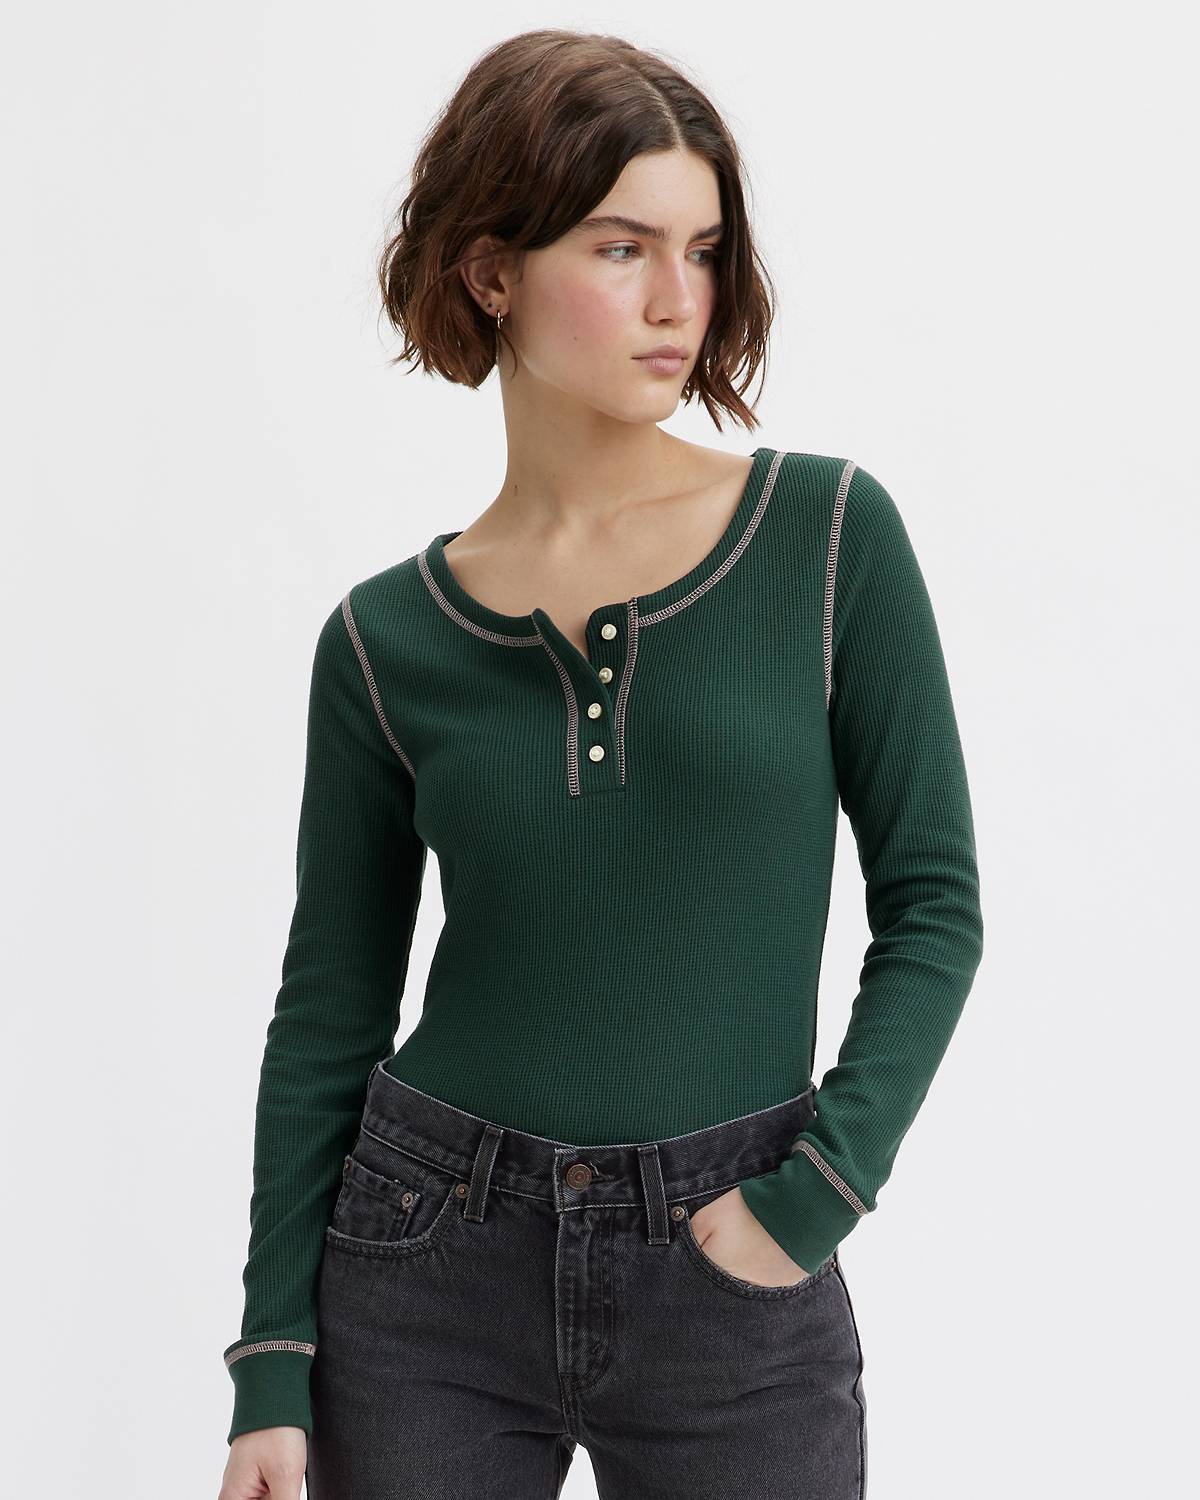 Women's Clothing for Sale - Deals on Women's Clothes